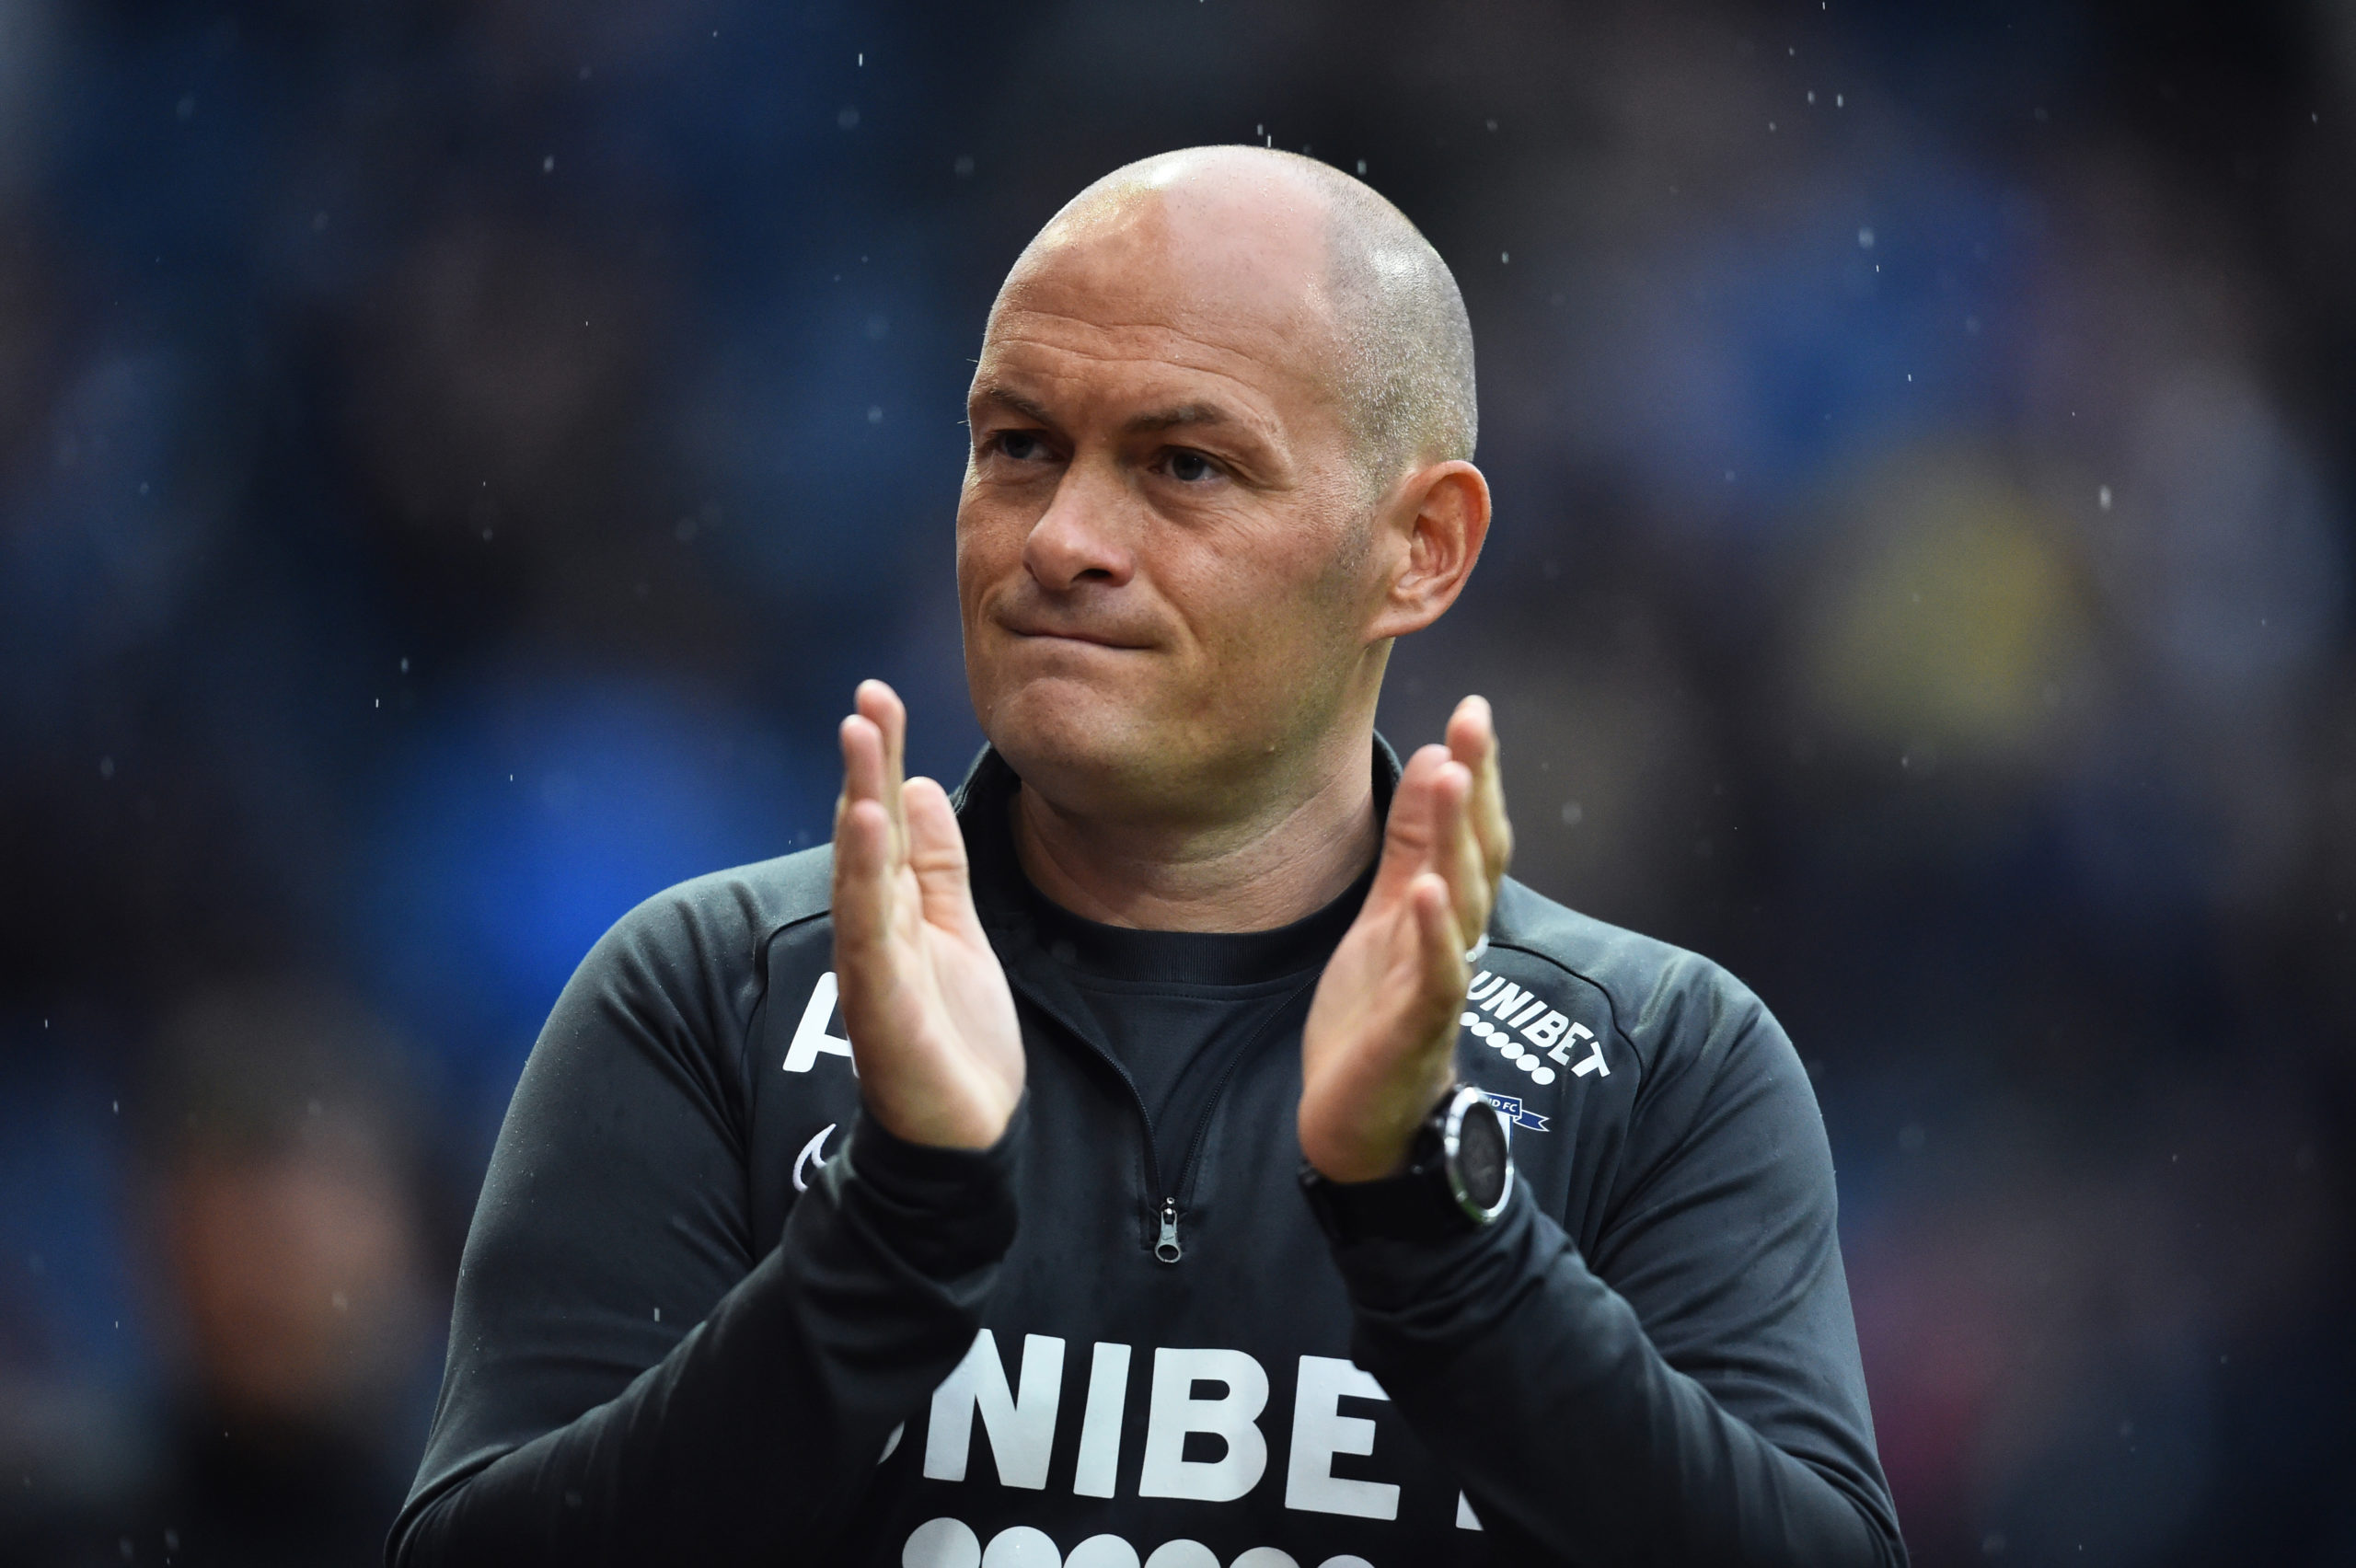 Alex Neil, considered by Celtic before second Lennon appointment, enters job market